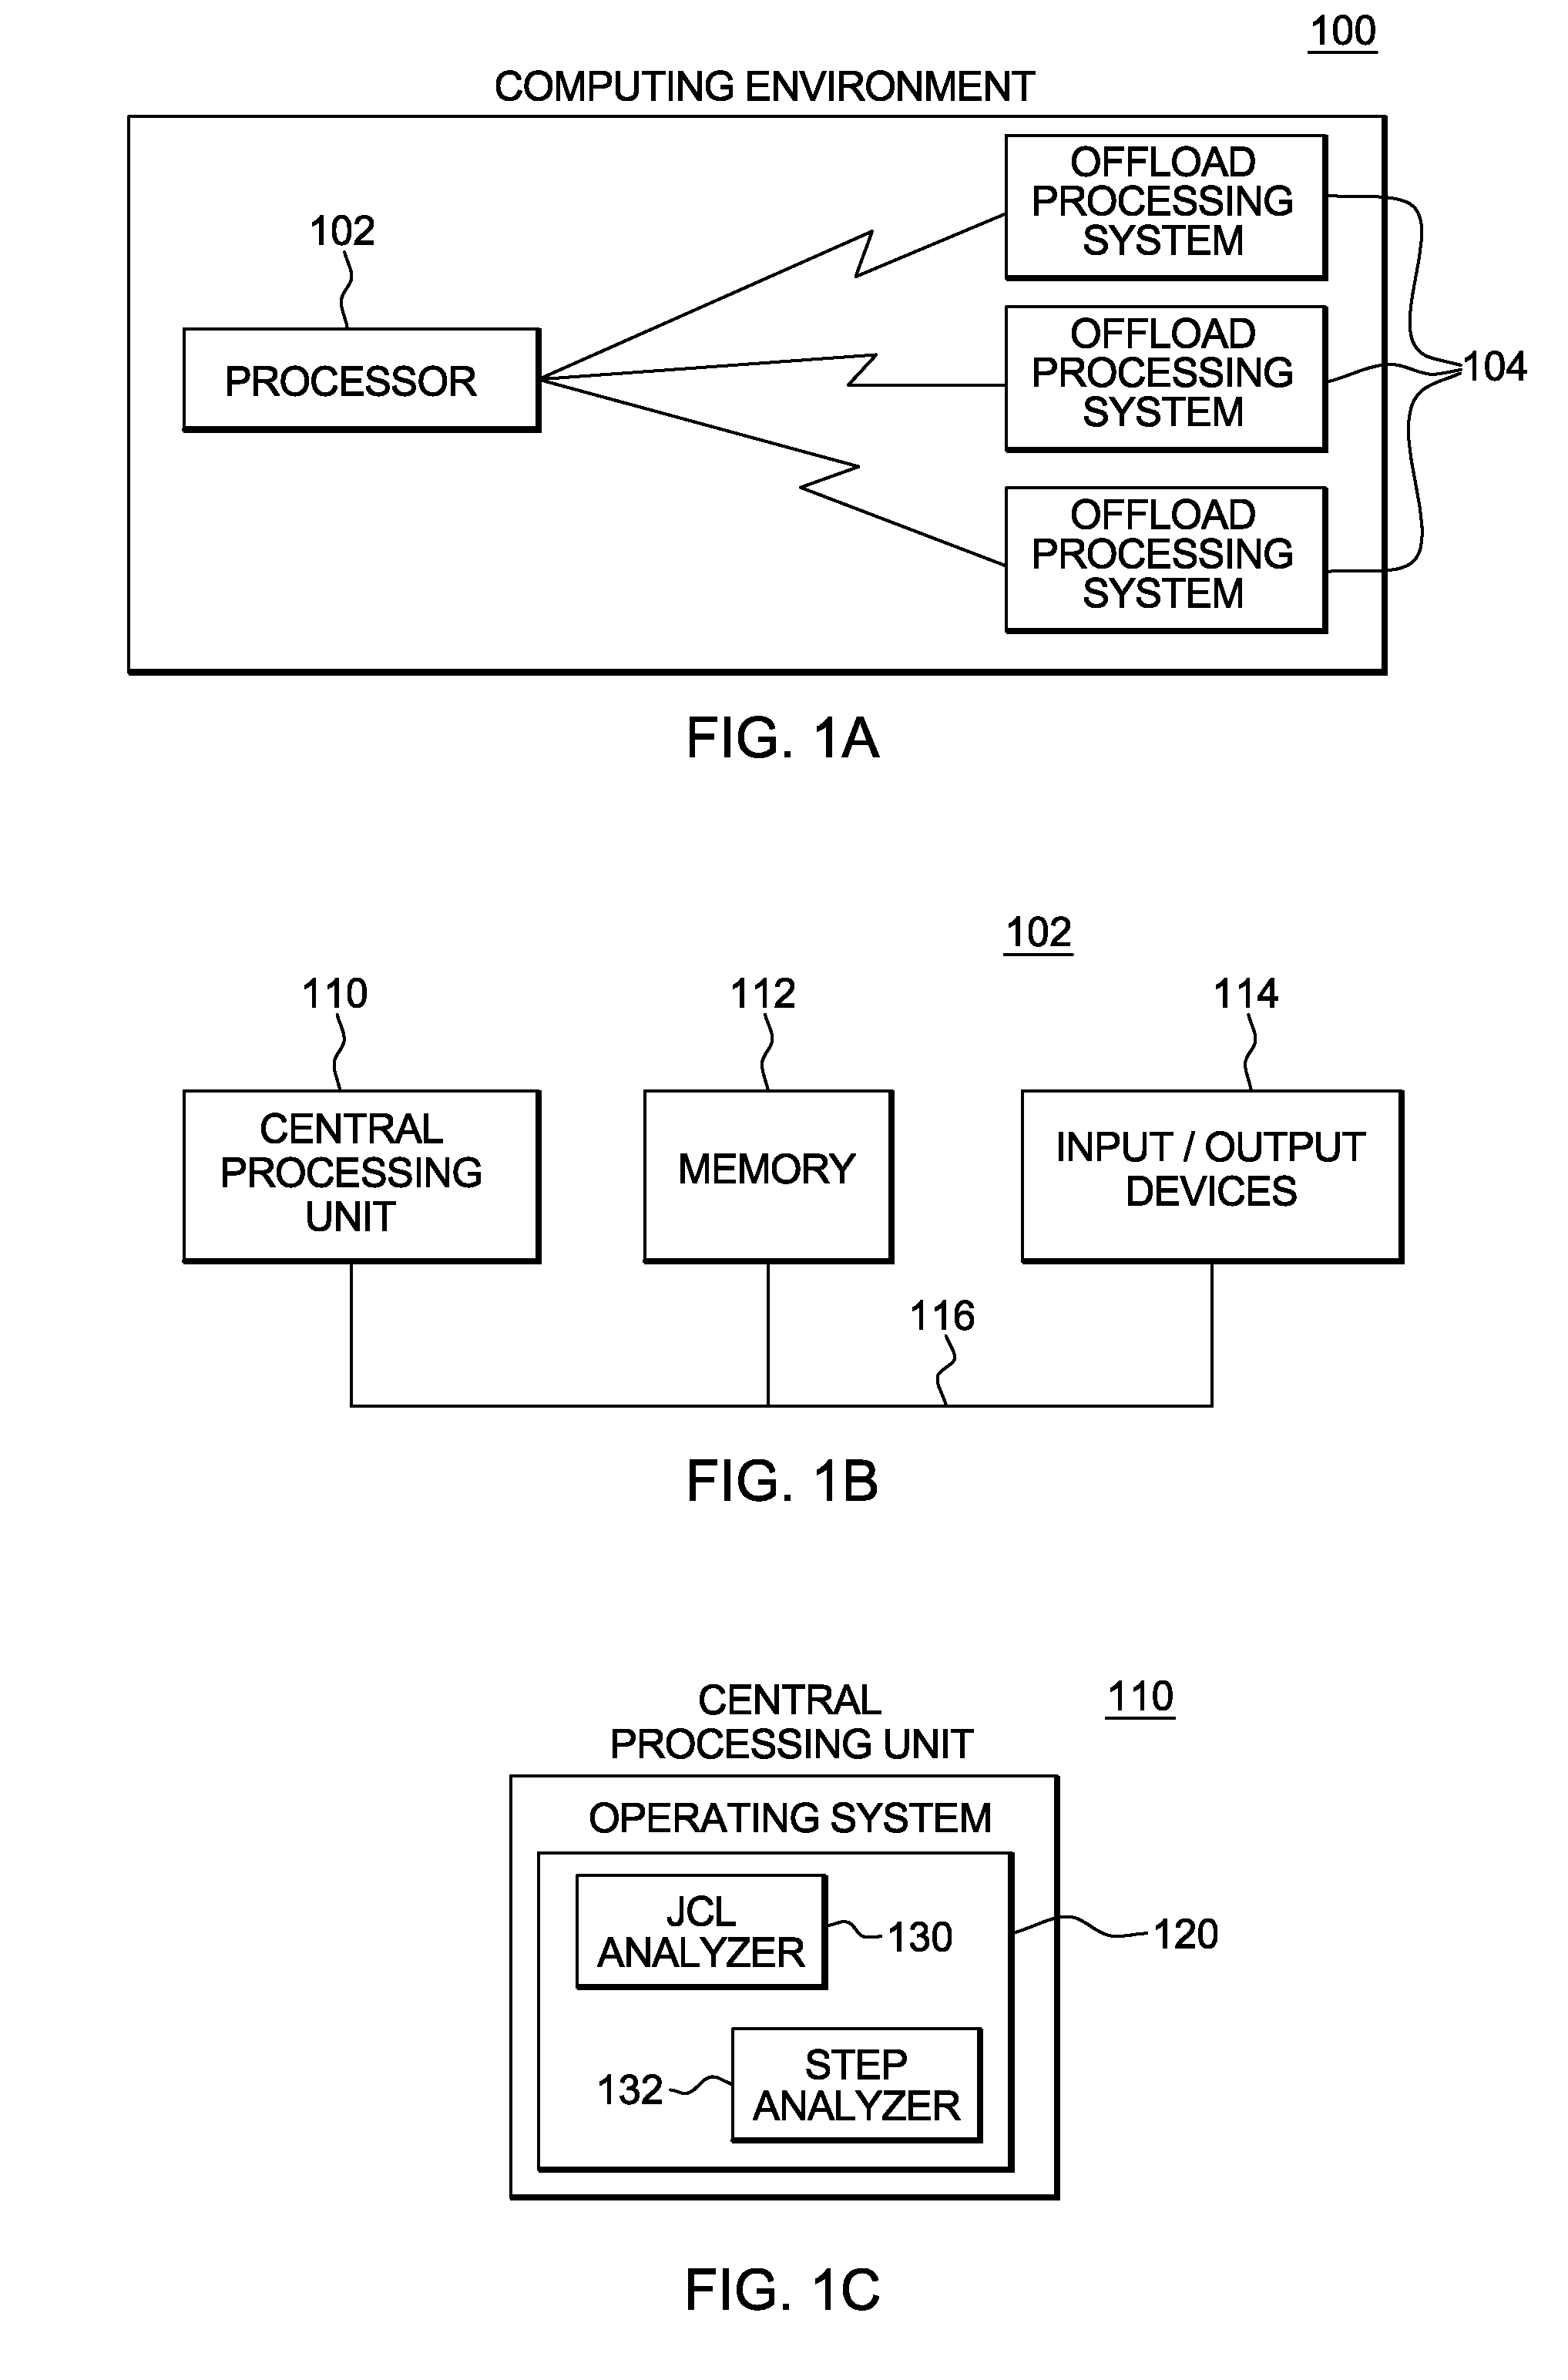 Execution of work units in a heterogeneous computing environment